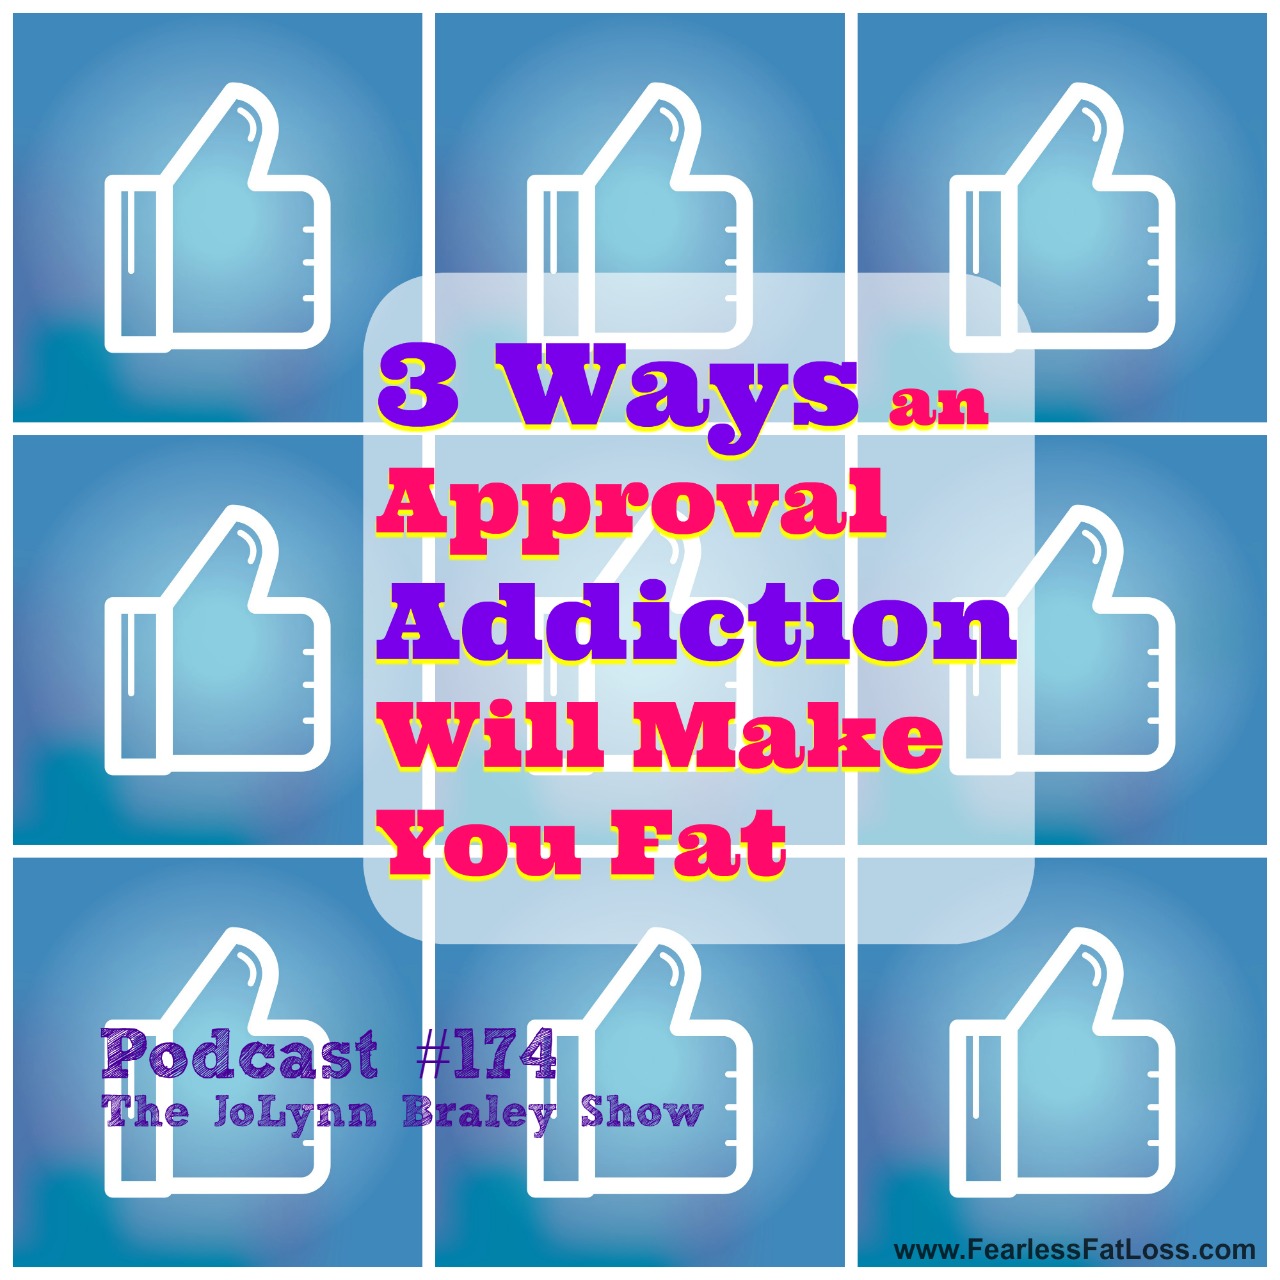 3 Ways An Approval Addiction Will Make You Fat | FearlessFatLoss.com | Permanent Weight Loss Coach JoLynn Braley | Emotional Eating Help